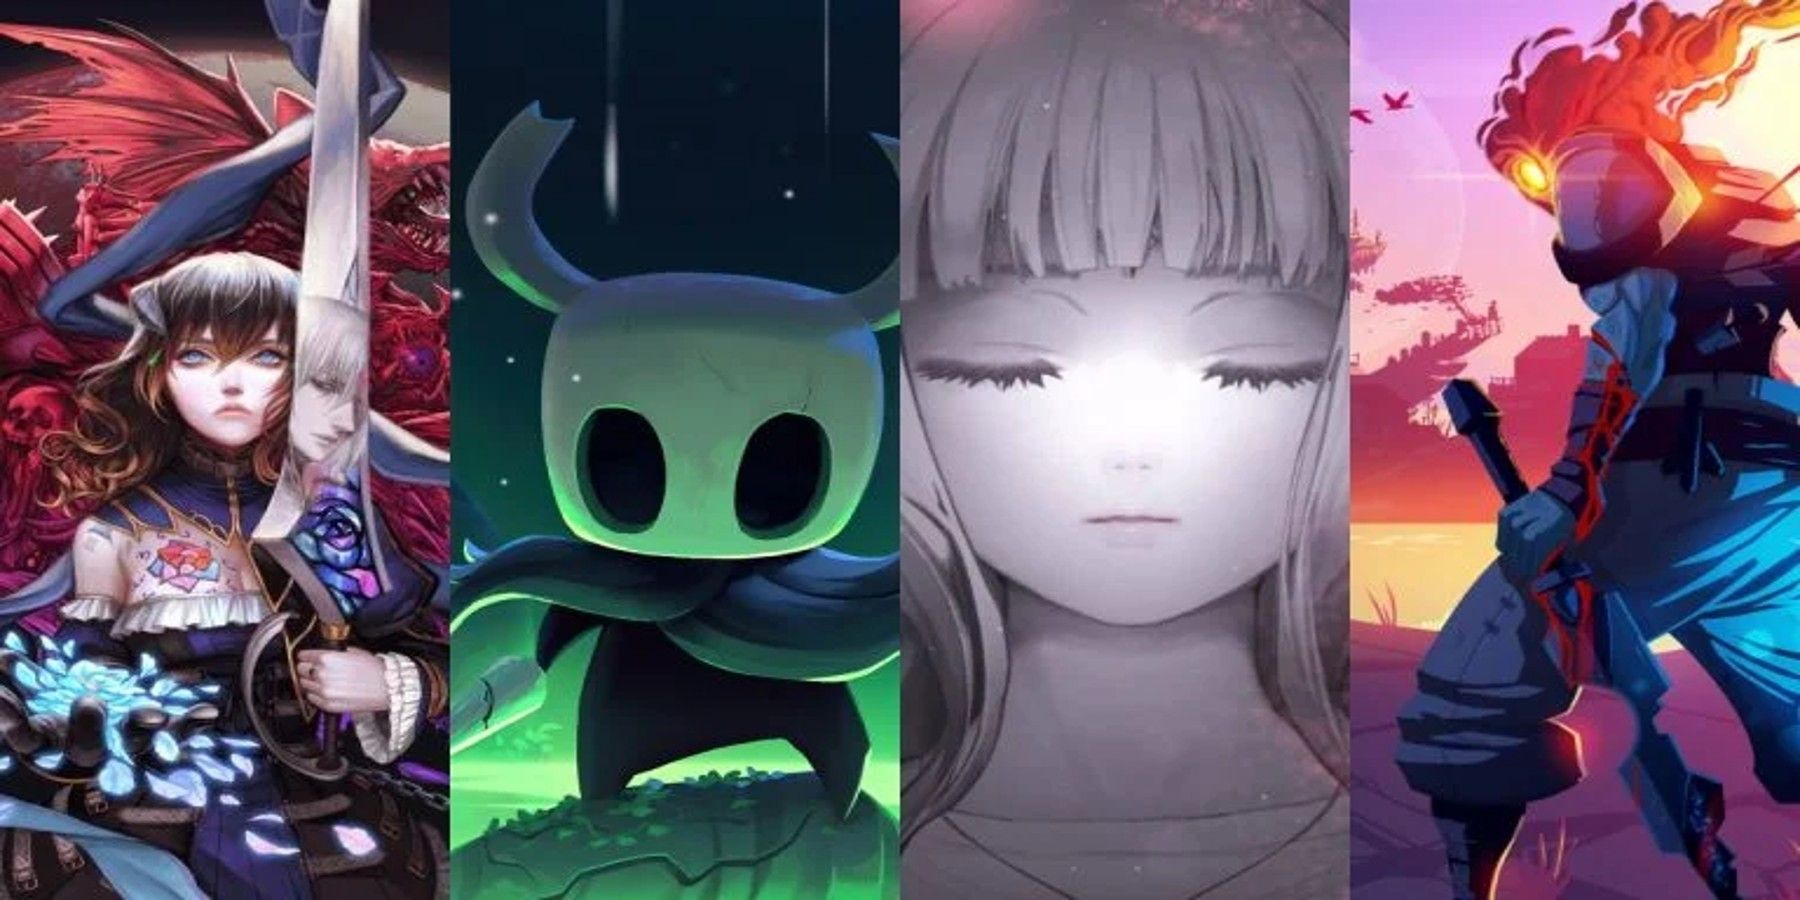 metroidvania_dead-cells-hollow-knight-ender-lillies-bloodstained